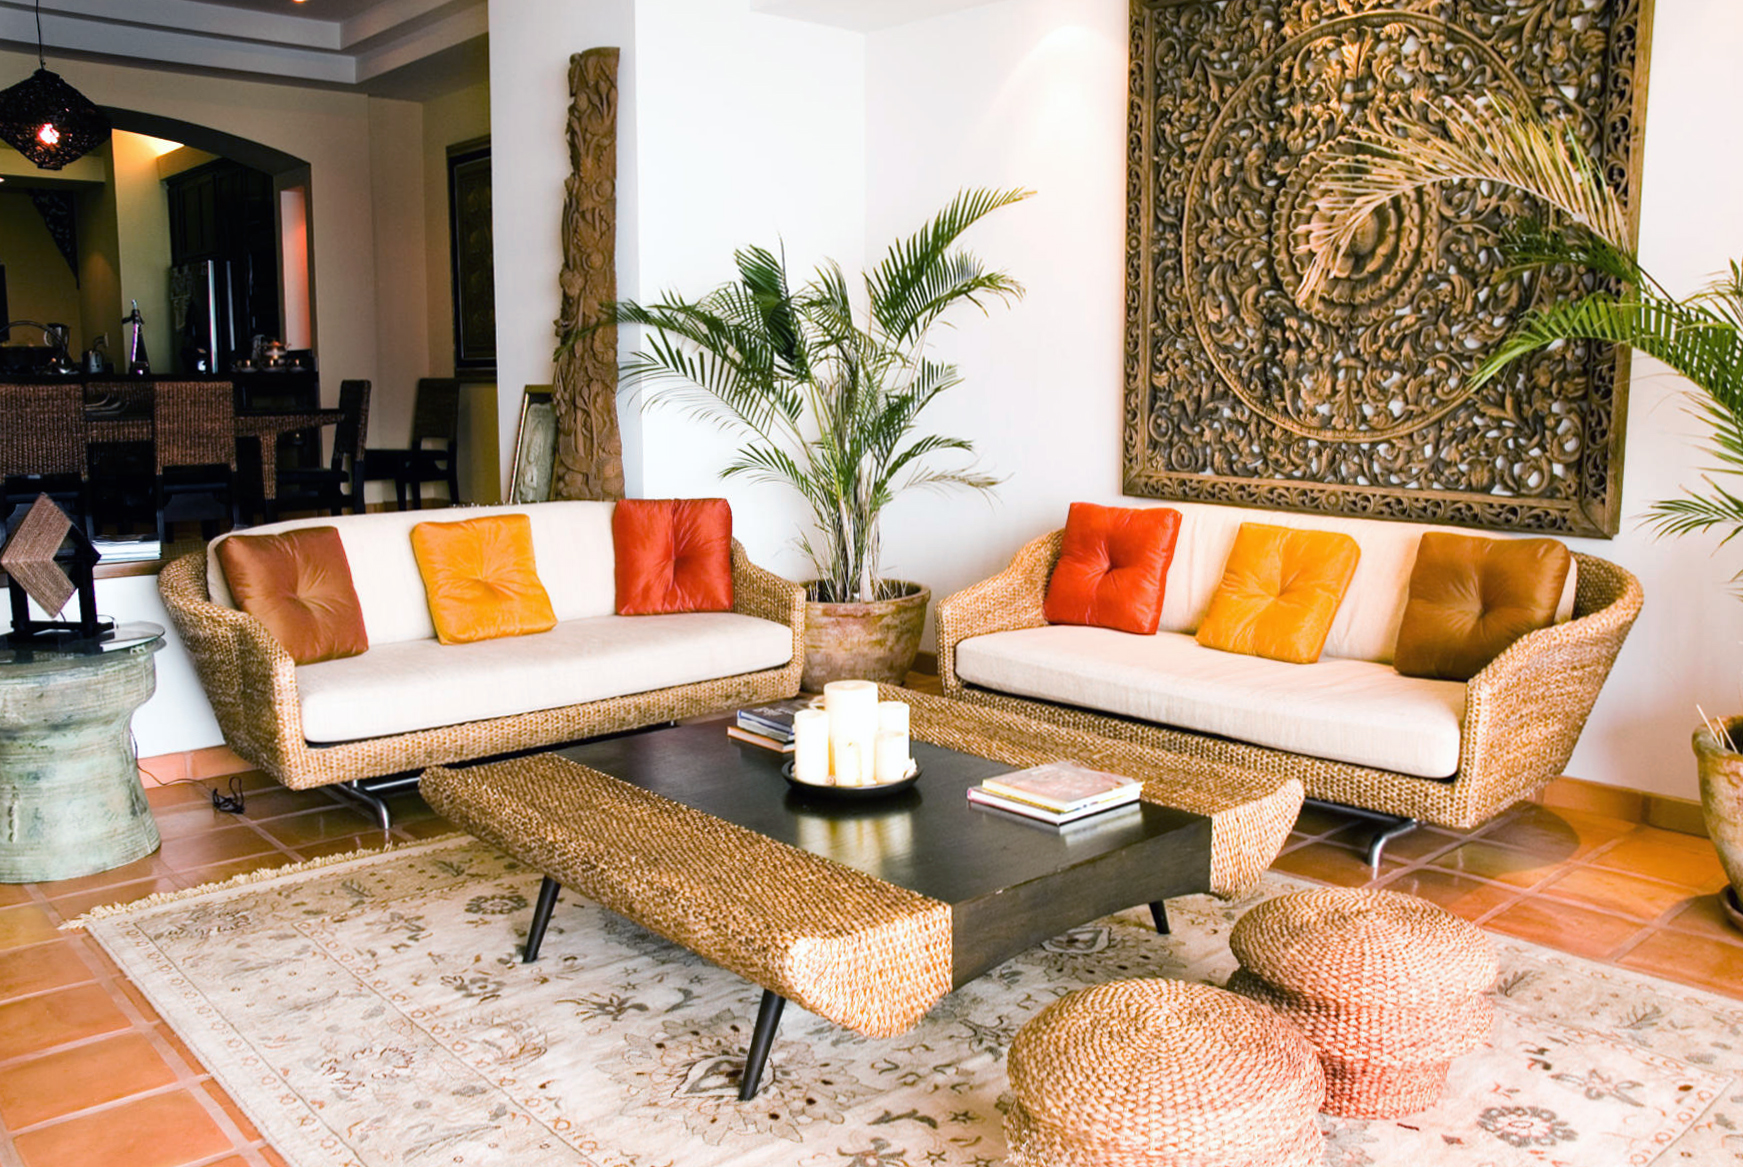 Bright tropical style in the interior photo 10